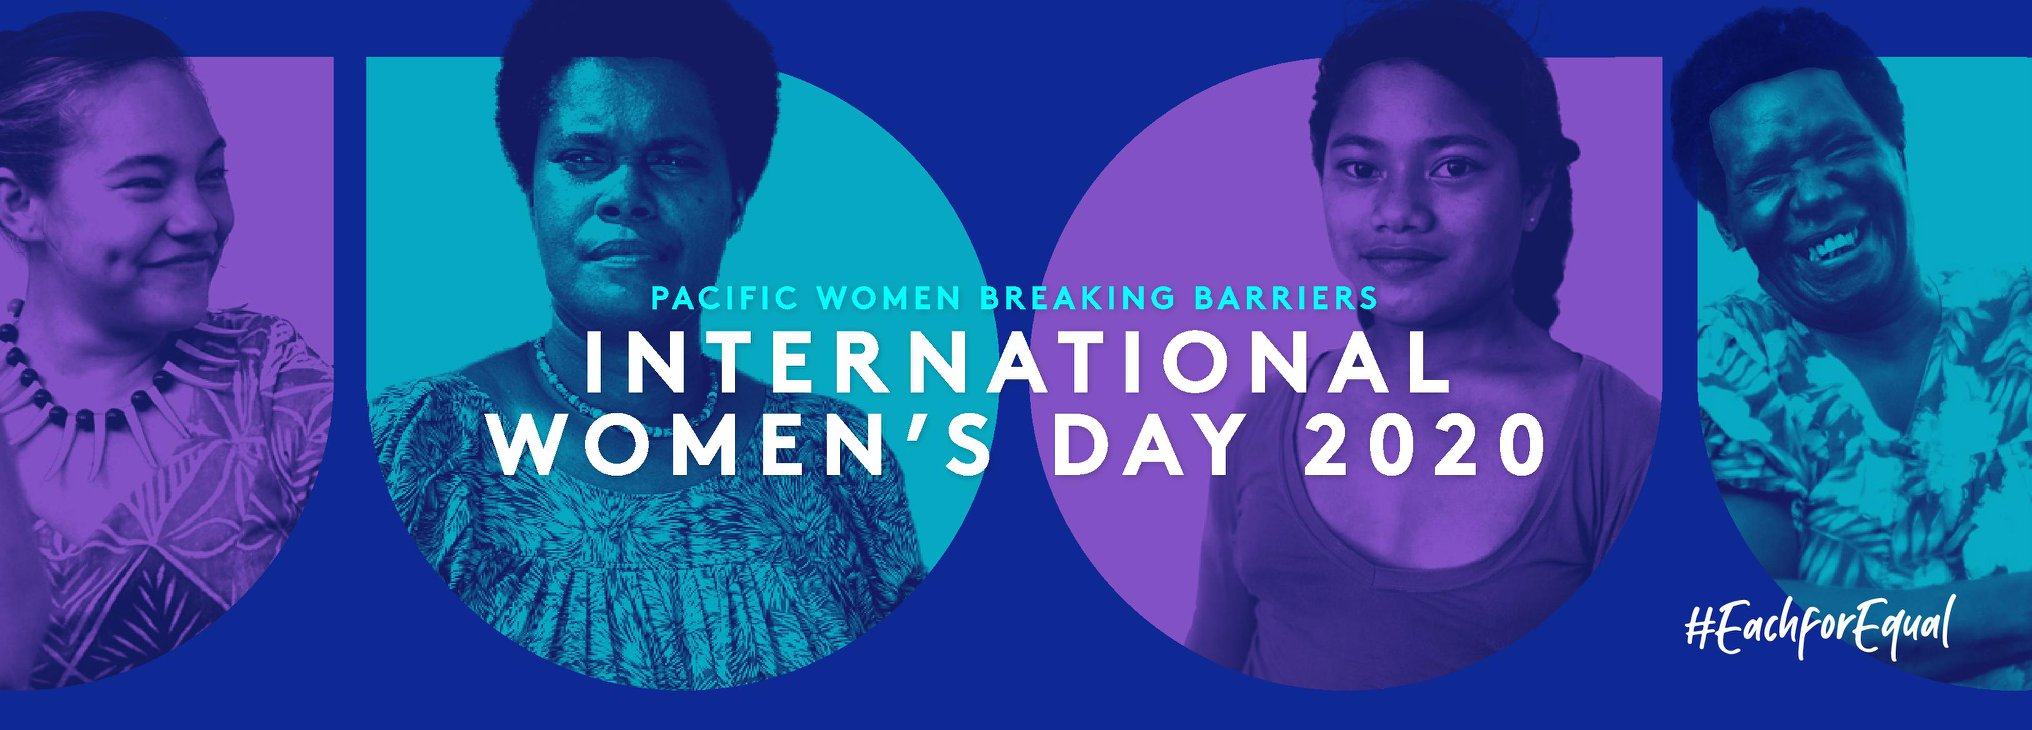 IWD2020: Meet The Women Who Are Breaking Barriers Across the Pacific